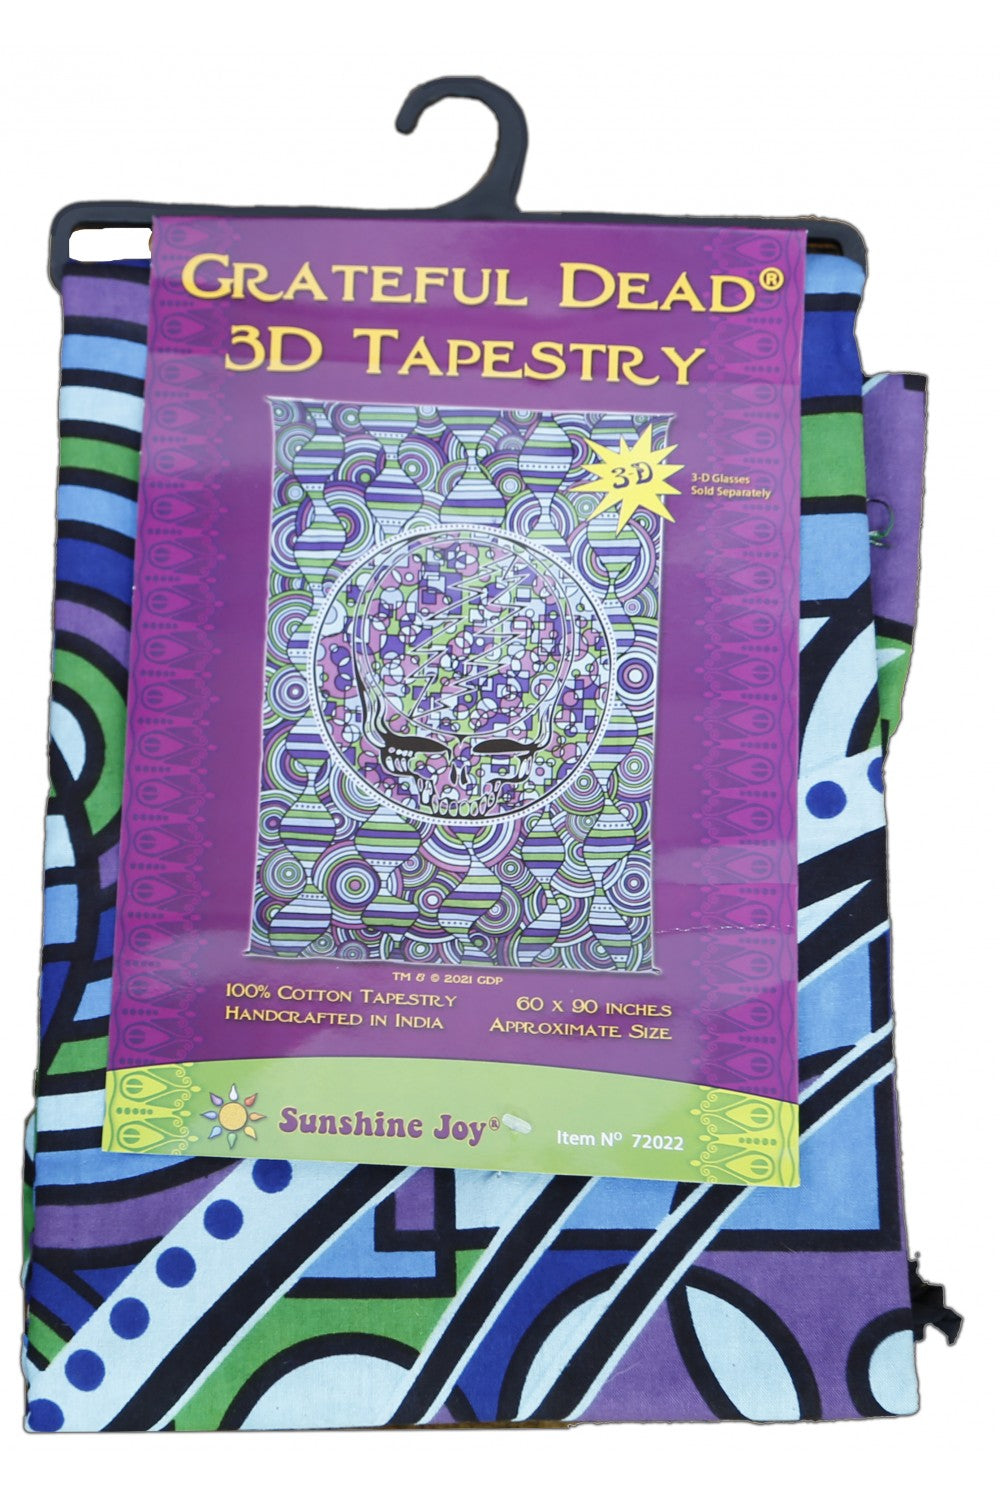 Grateful Dead SYF Under The Sea Tapestry - Art by Taylar McRee